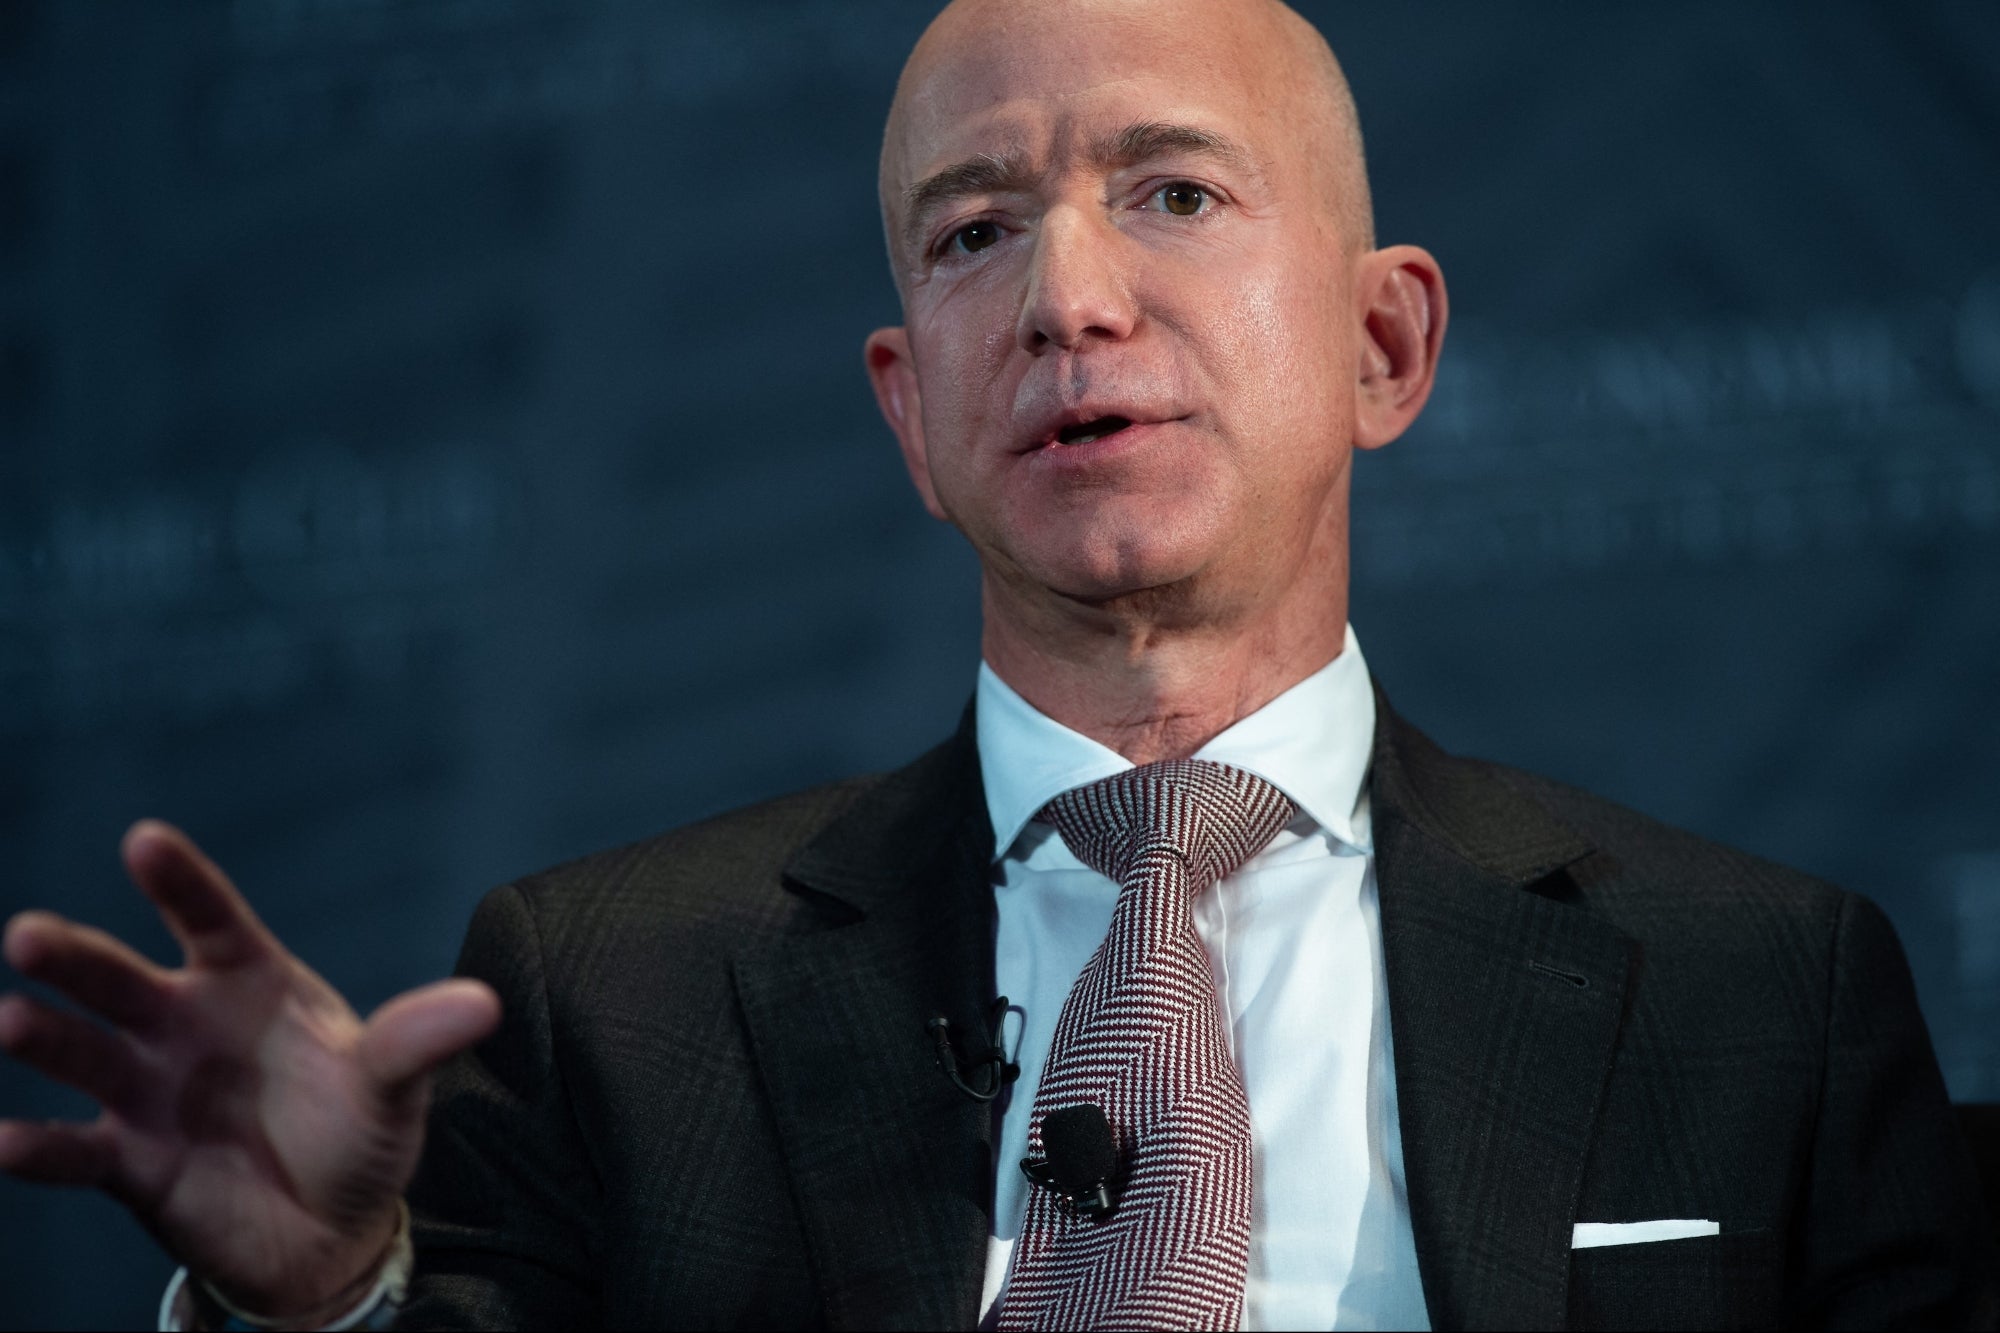 Jeff Bezos and Amazon Execs Historic An Encrypted Messaging App to Talk About ‘Sensitive Enterprise Matters,’ FTC Alleges